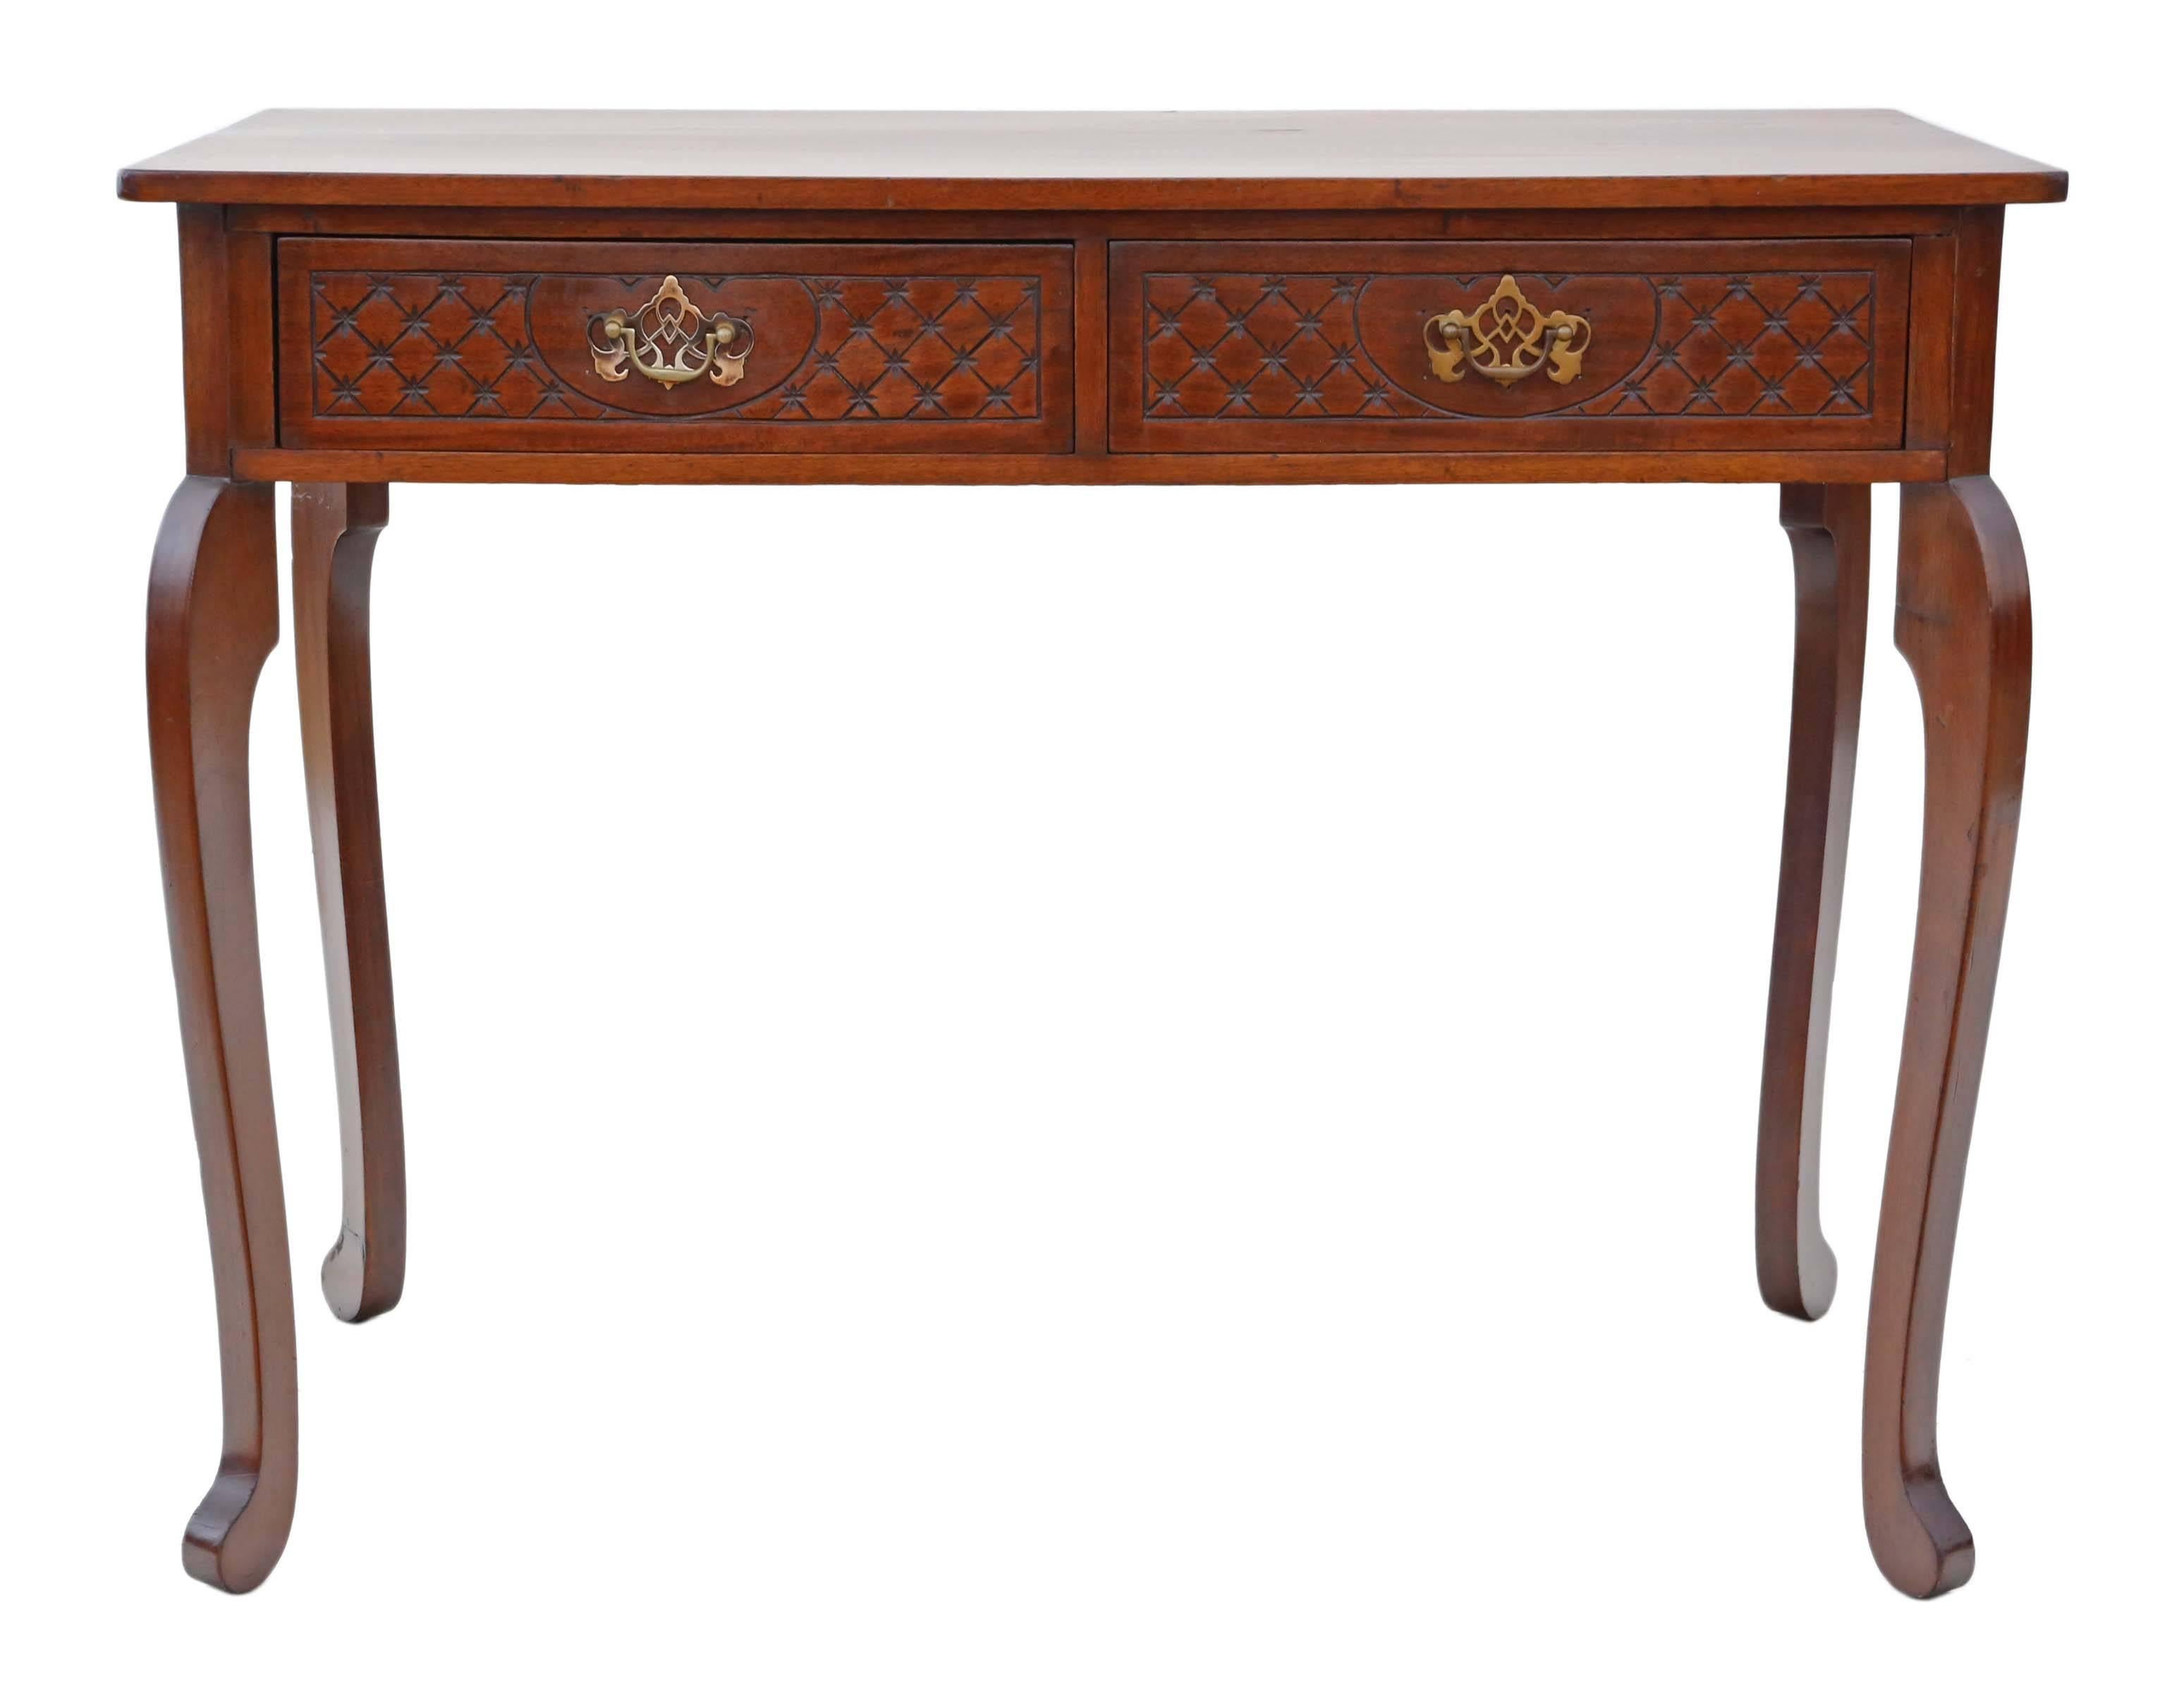 British Antique Victorian Aesthetic circa 1900 Mahogany Writing Desk or Dressing Table For Sale